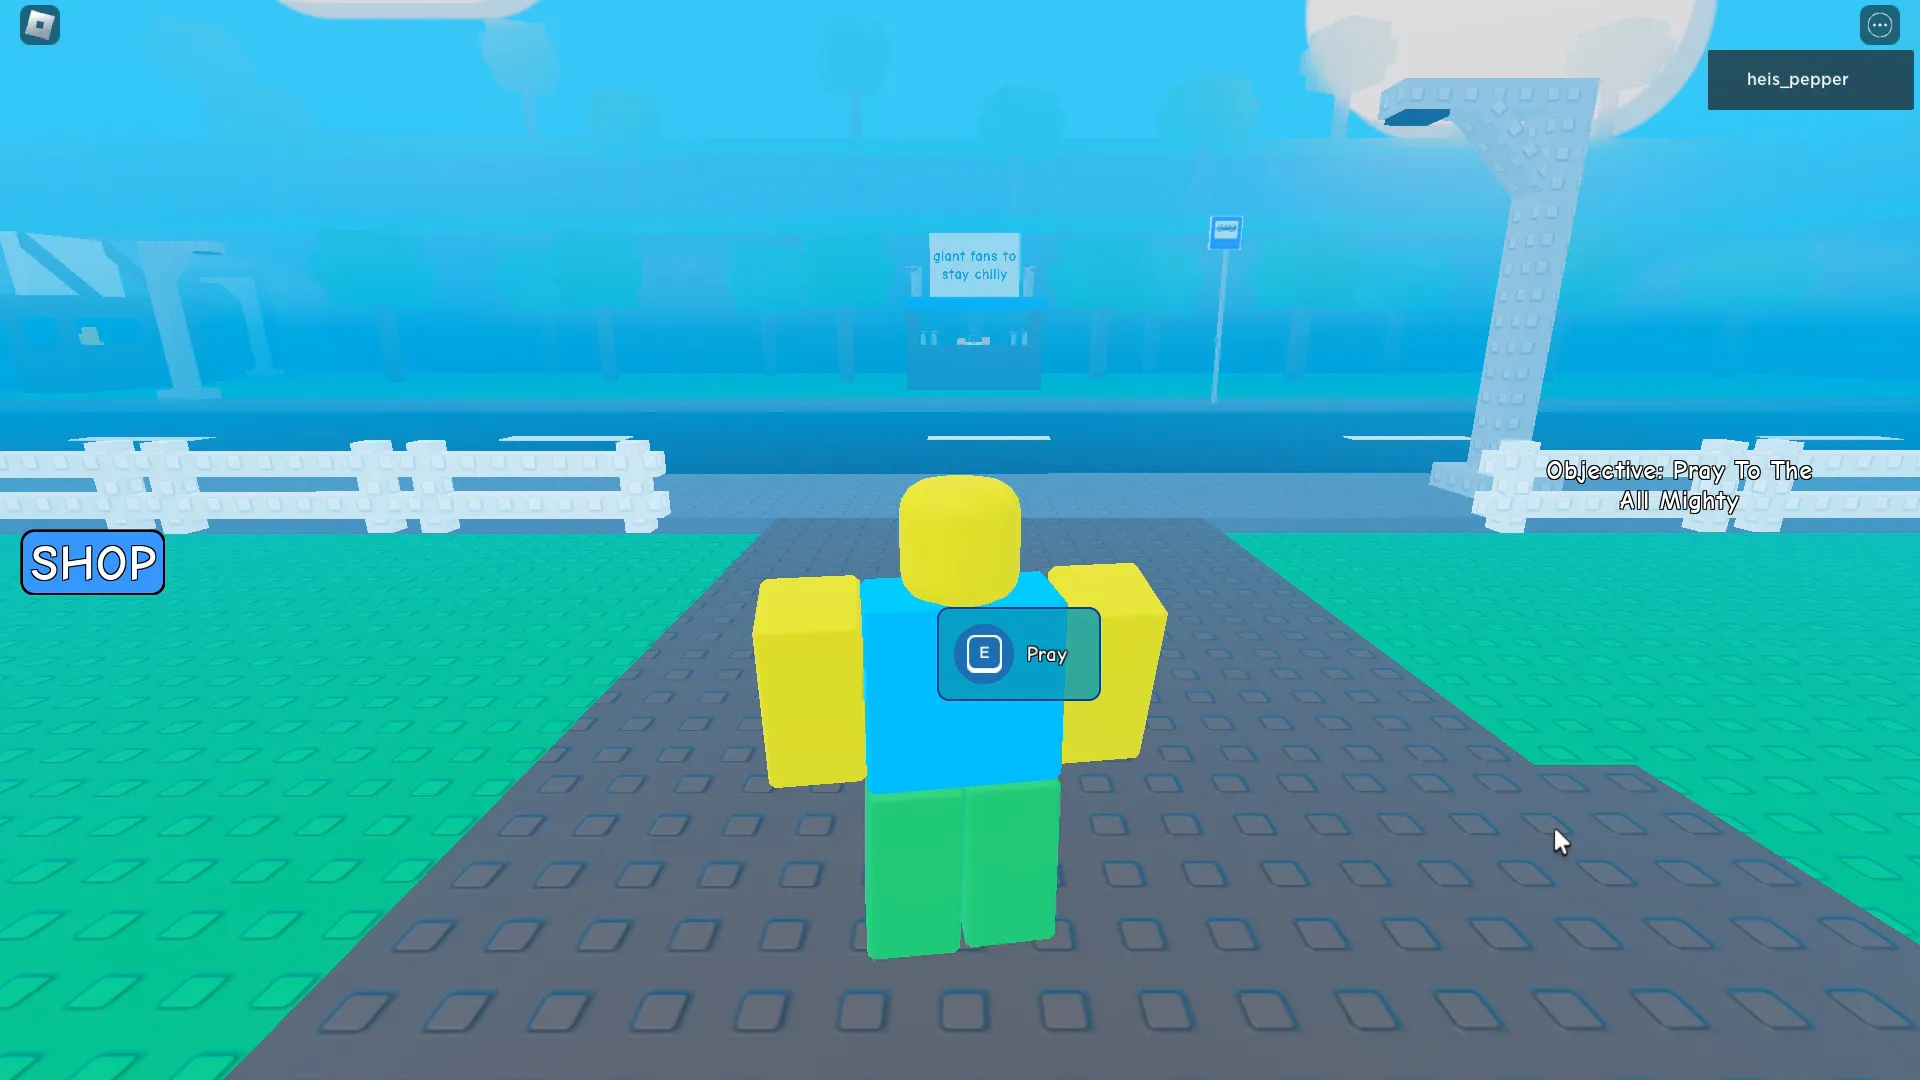 Need More Cold on Roblox Good Ending, pray interaction